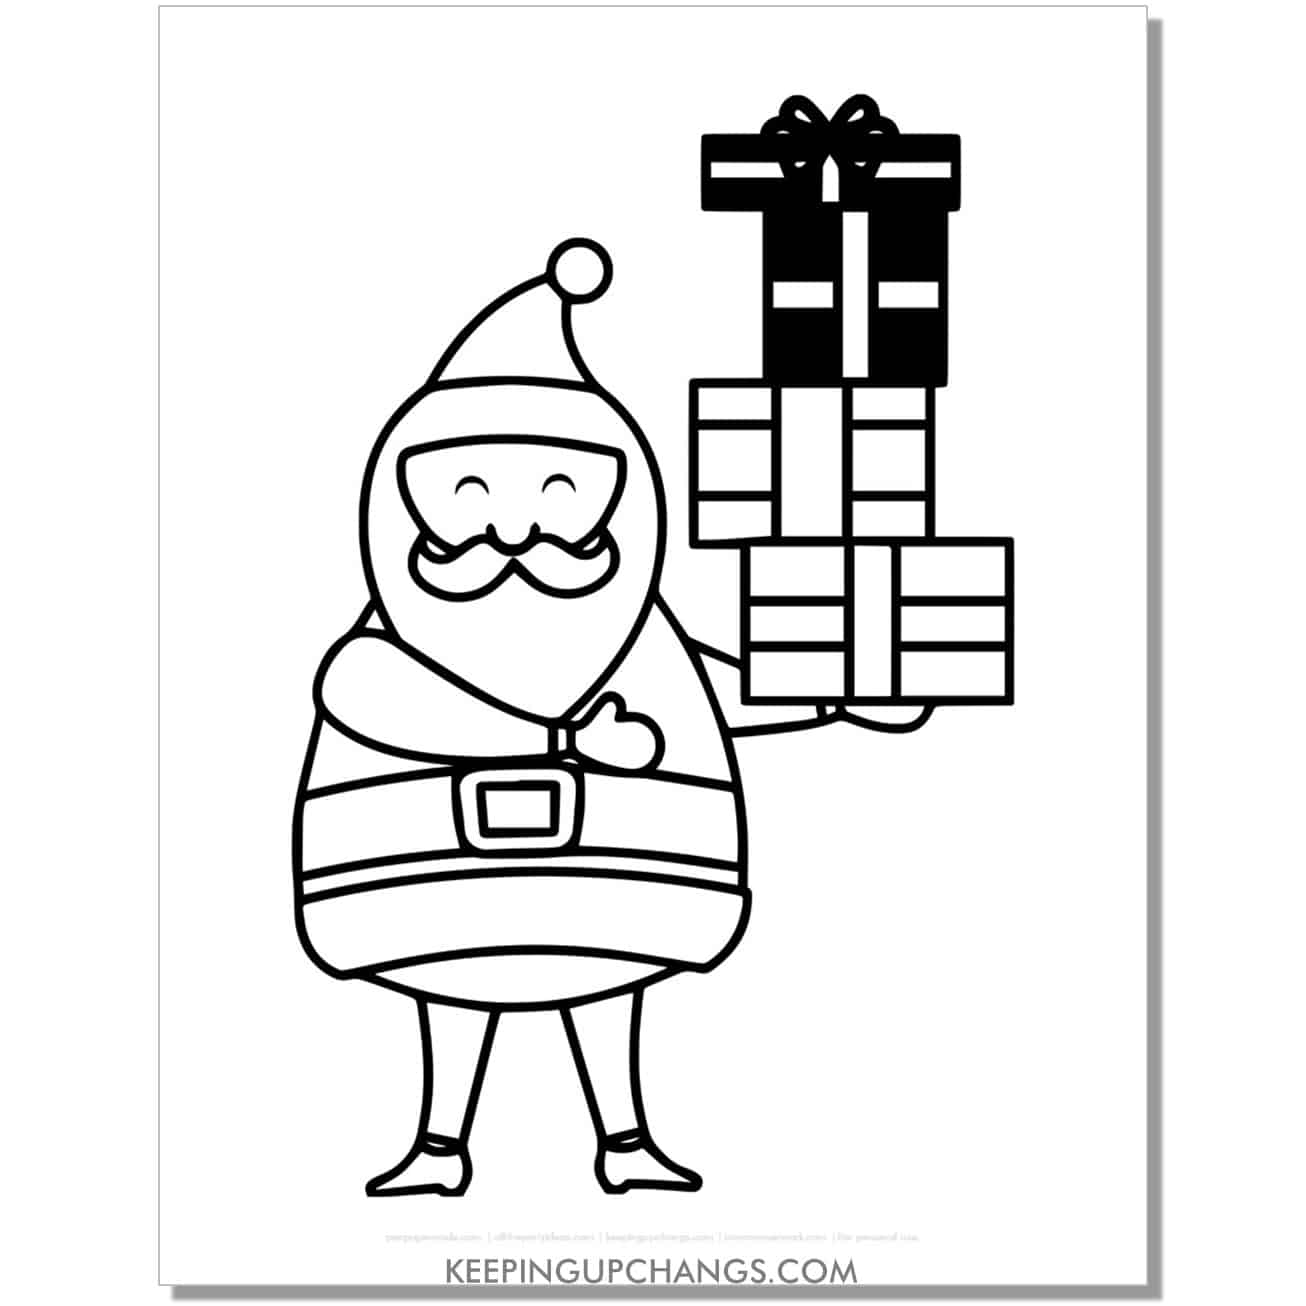 free santa with stack of presents outline, template, cut out, coloring page.